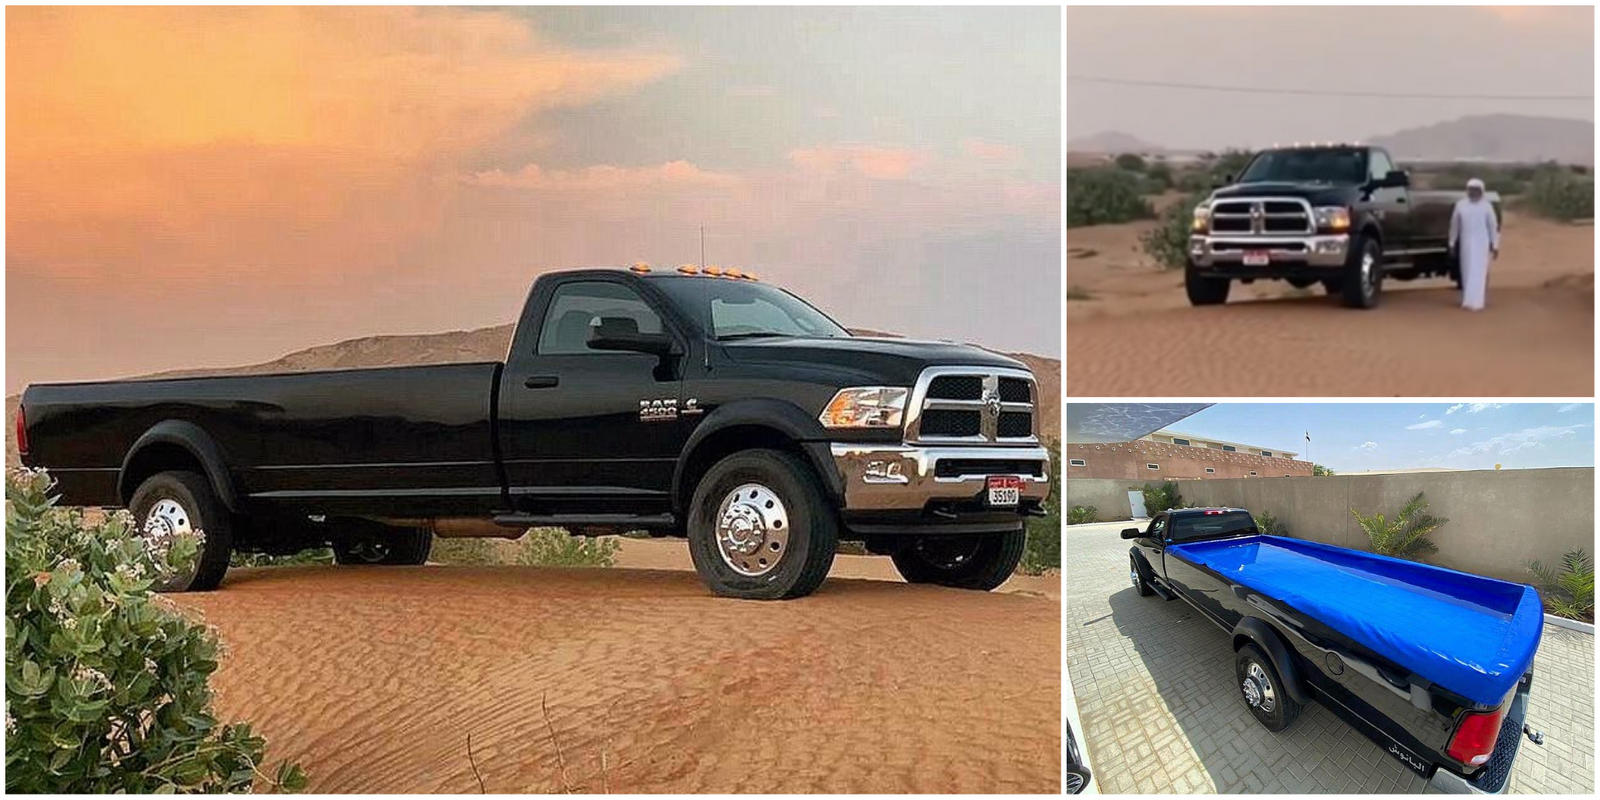 abort Motley Børnepalads Worth $20 billion this Emirati sheik has the world's longest pickup truck -  The stretched Dodge RAM has a 16 feet bed that is converted into a party  jacuzzi and inspite its